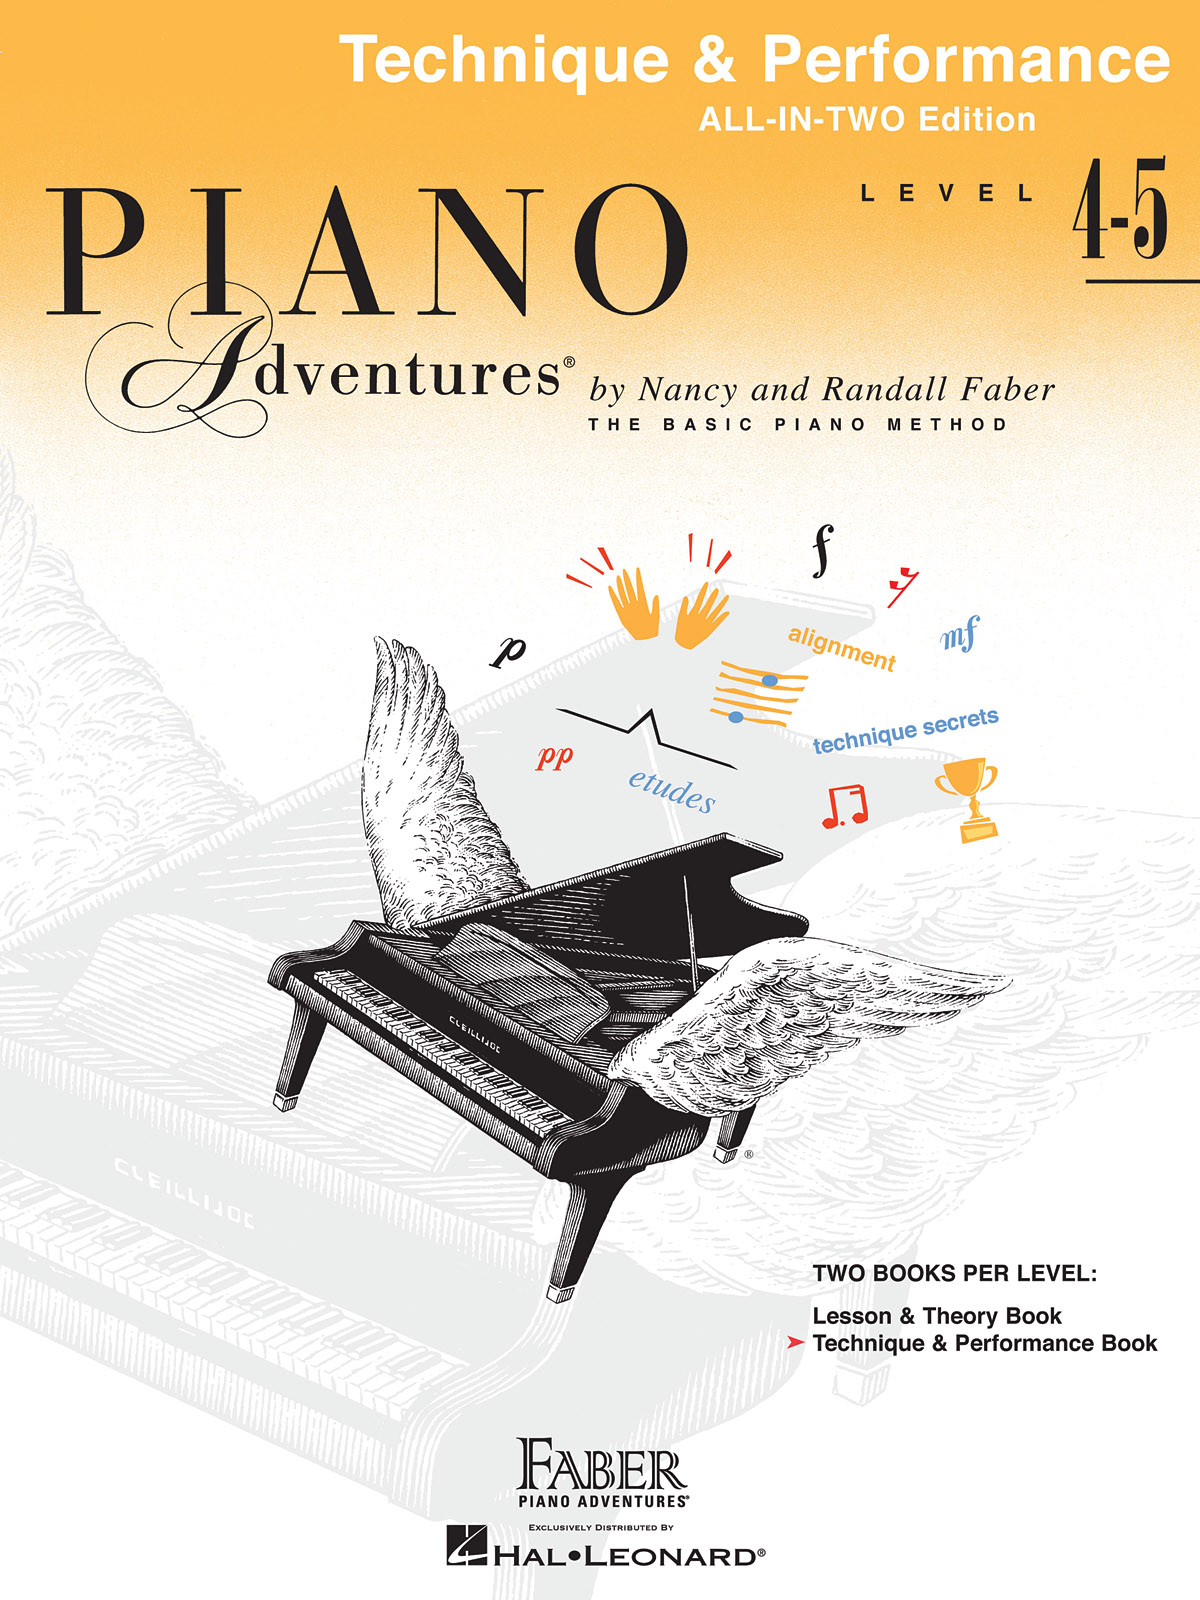 Nancy Faber Randall Faber: Piano Adventures All-In-Two Level 4-5 Tech & Perf: